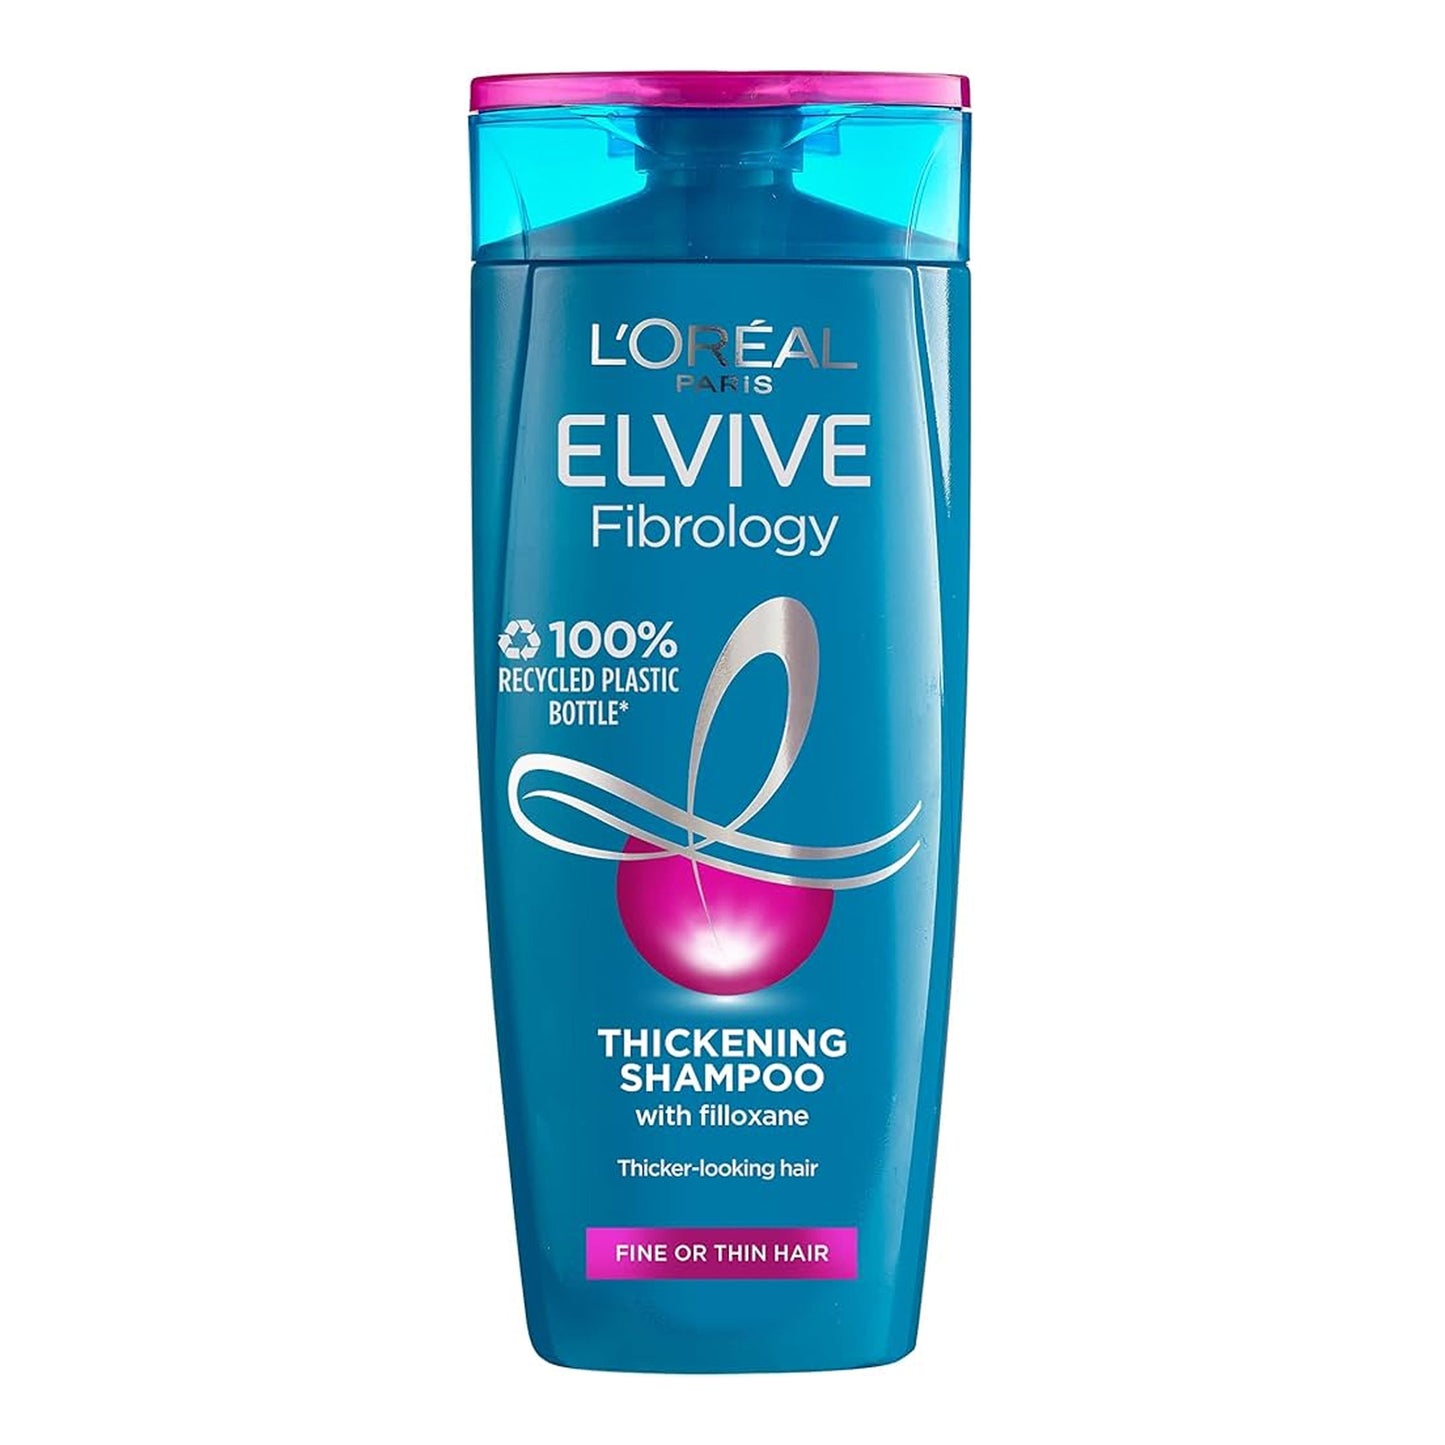 L'OREAL PARIS - ELVIVE FIBROLOGY THICKENING SHAMPOO WITH FILLOXANE - 400ML